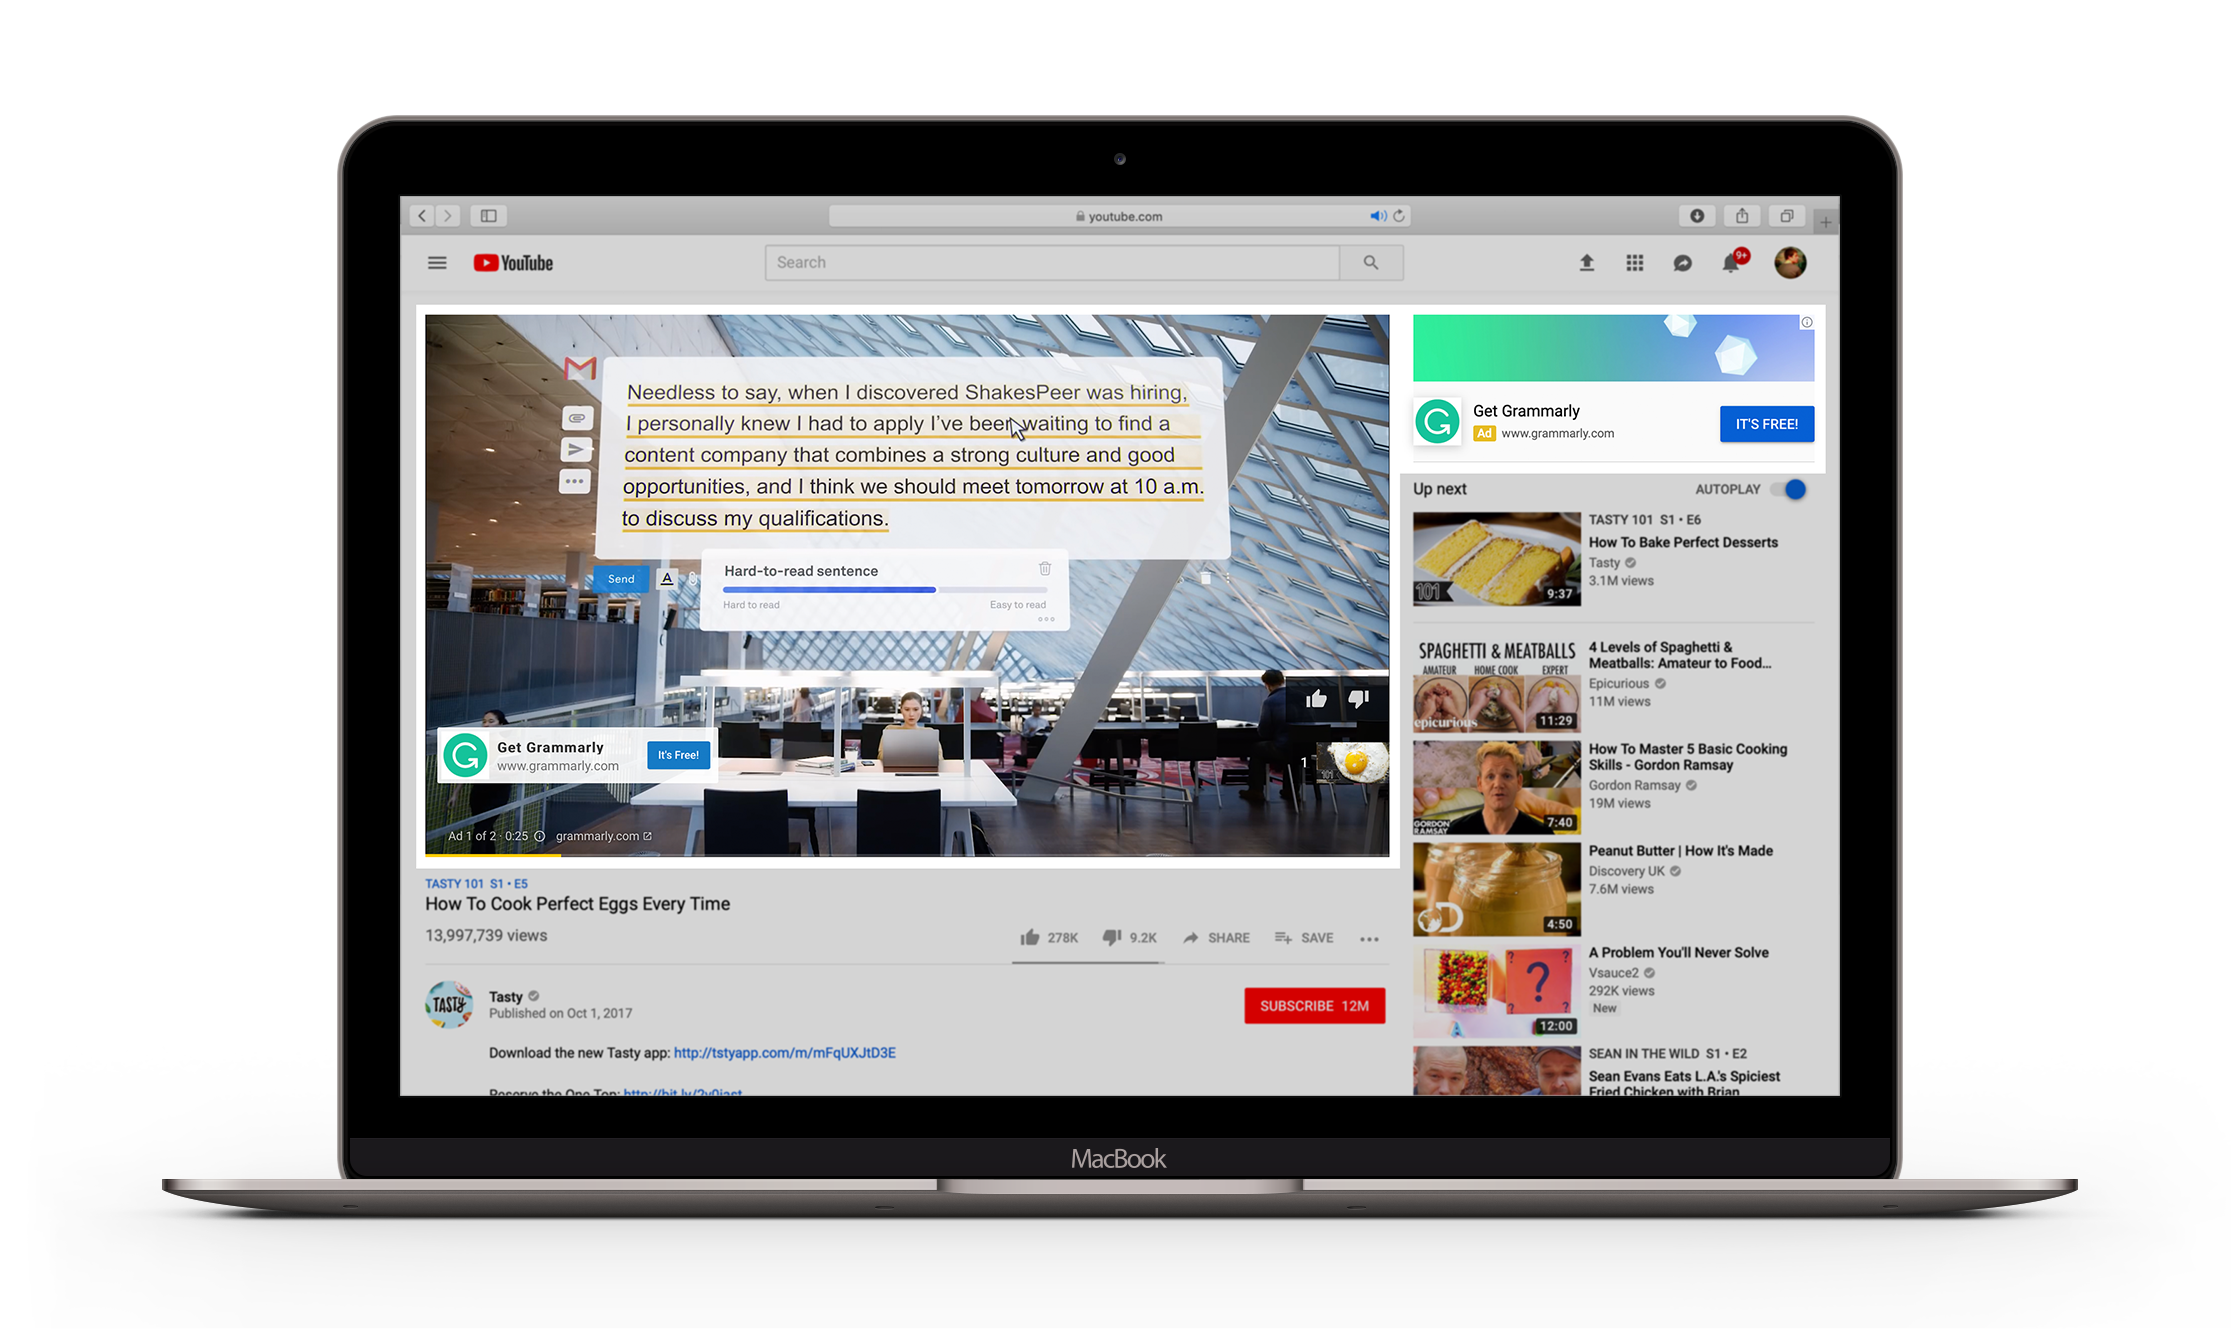 You can display your ads within YouTube videos, targeting people who would benefit the most from your product or service. The brand Grammarly showcases their assistant writing software and includes a link to their website. 